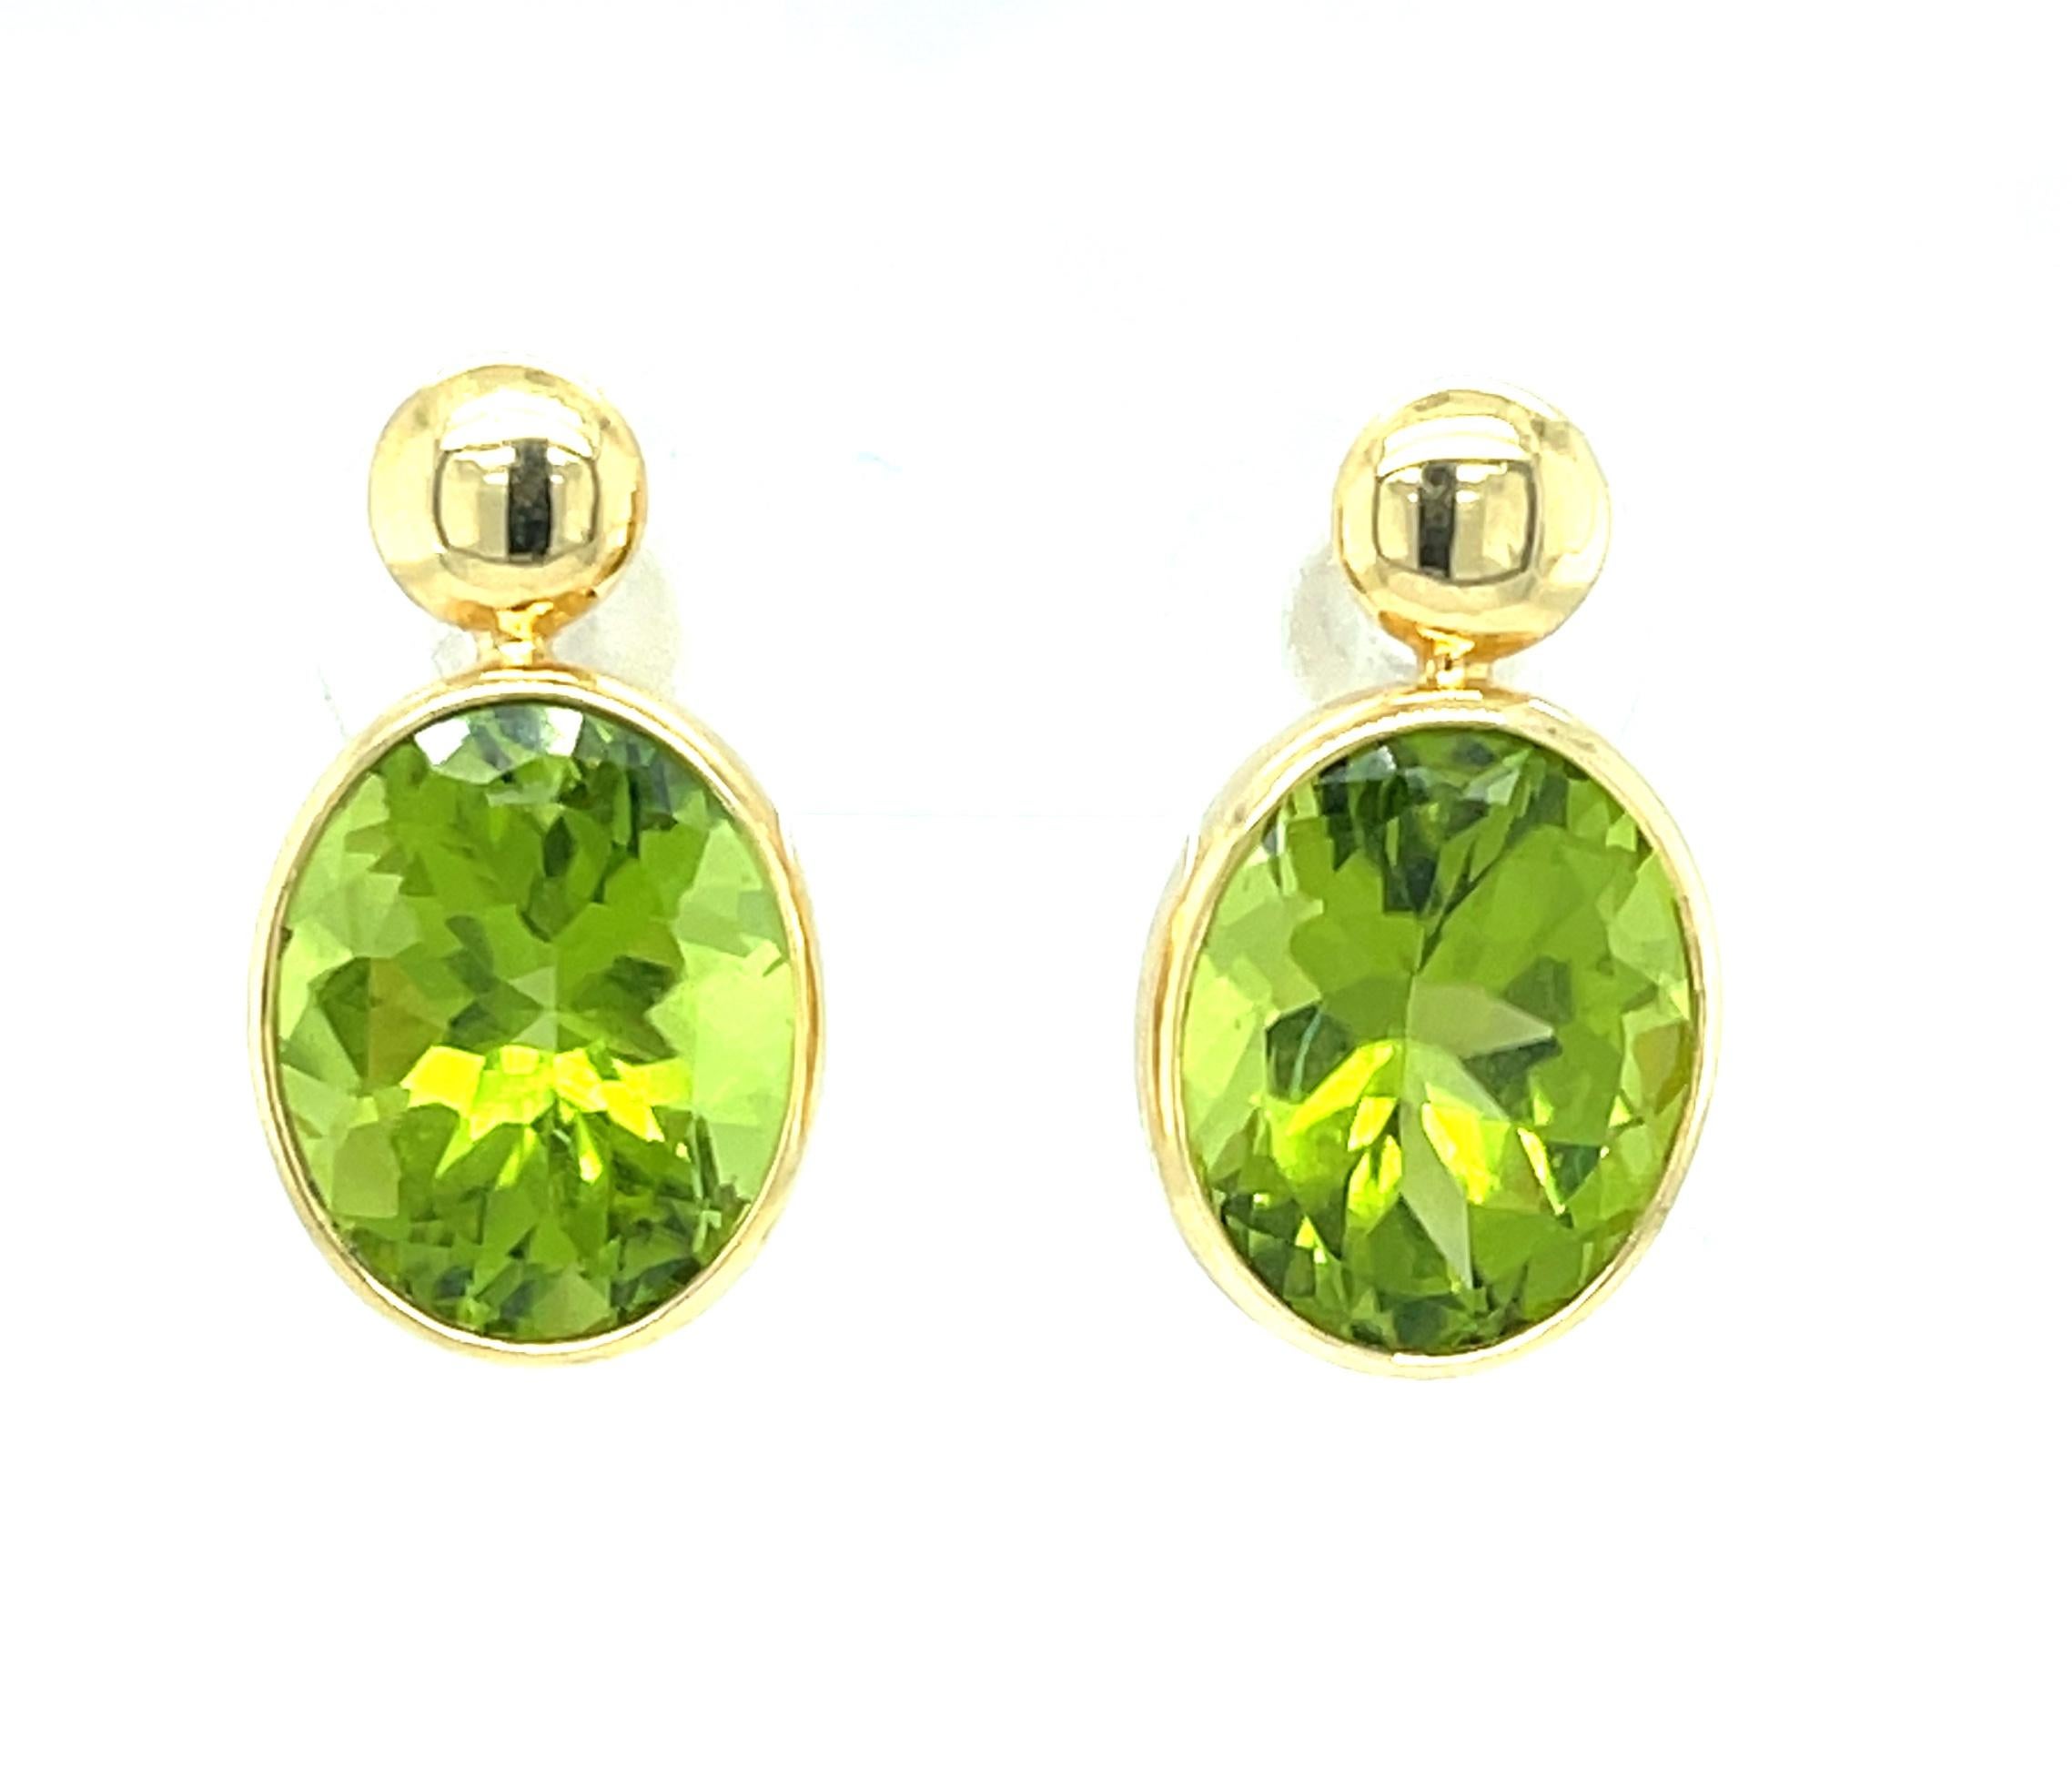 These stylish and versatile 18k yellow gold peridot drop earrings feature a beautifully matched pair of bright, spring green peridots weighing 9.70 carats! The brilliant green gems are set in gorgeous handmade bezels designed to hang just below the